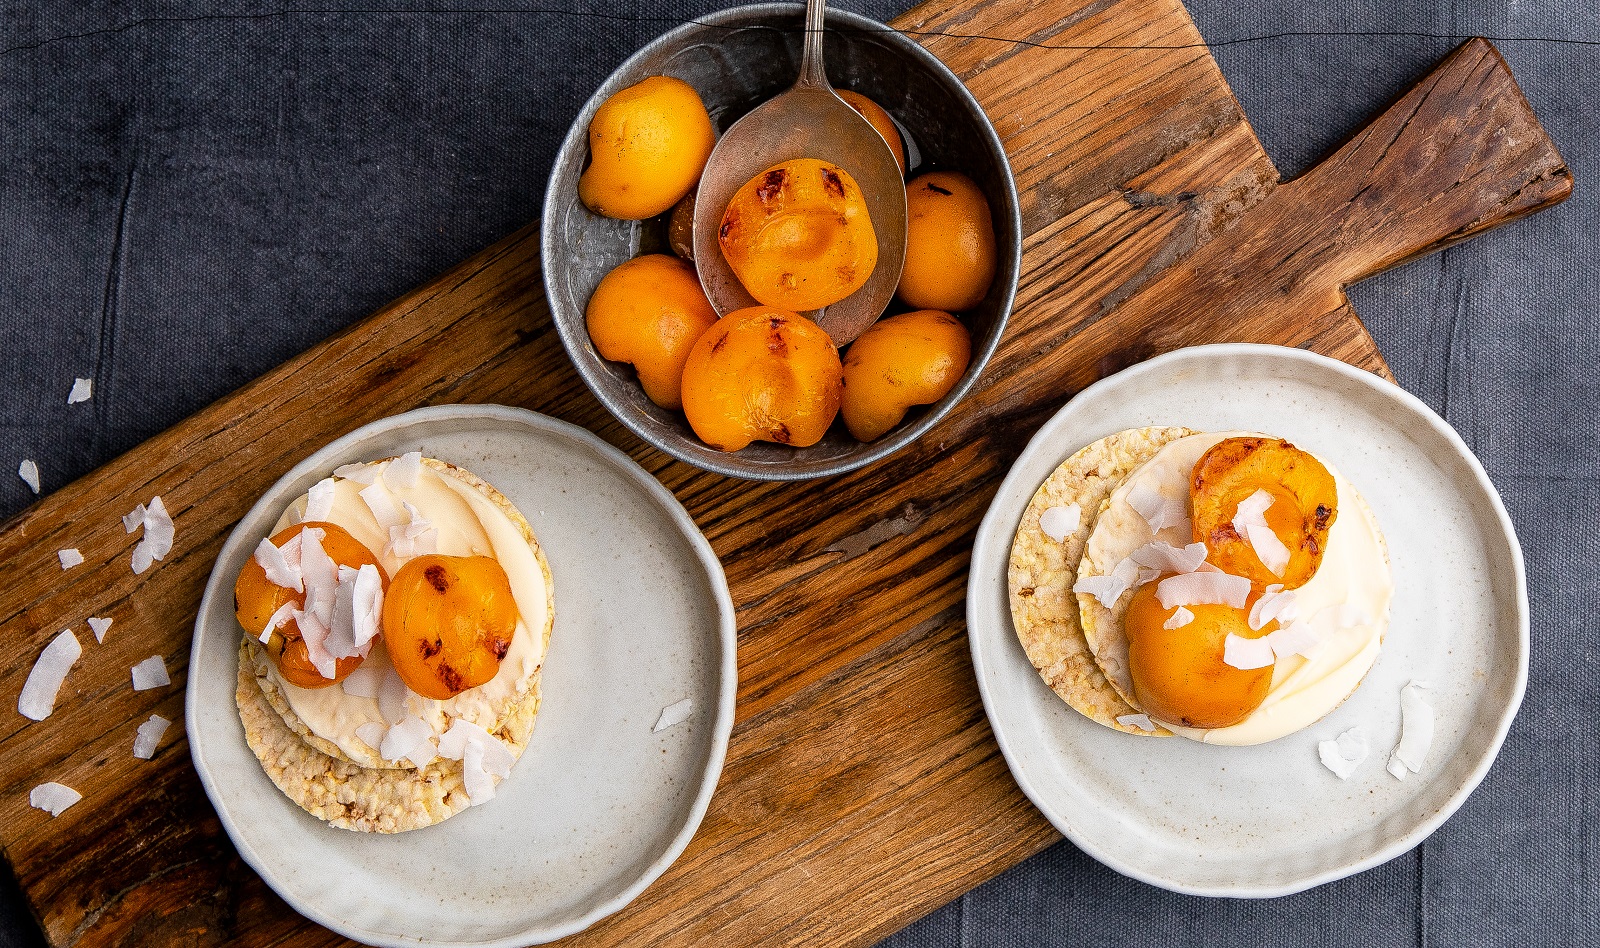 Corn Thins slices with grilled apricot, cream cheese & coconut flakes